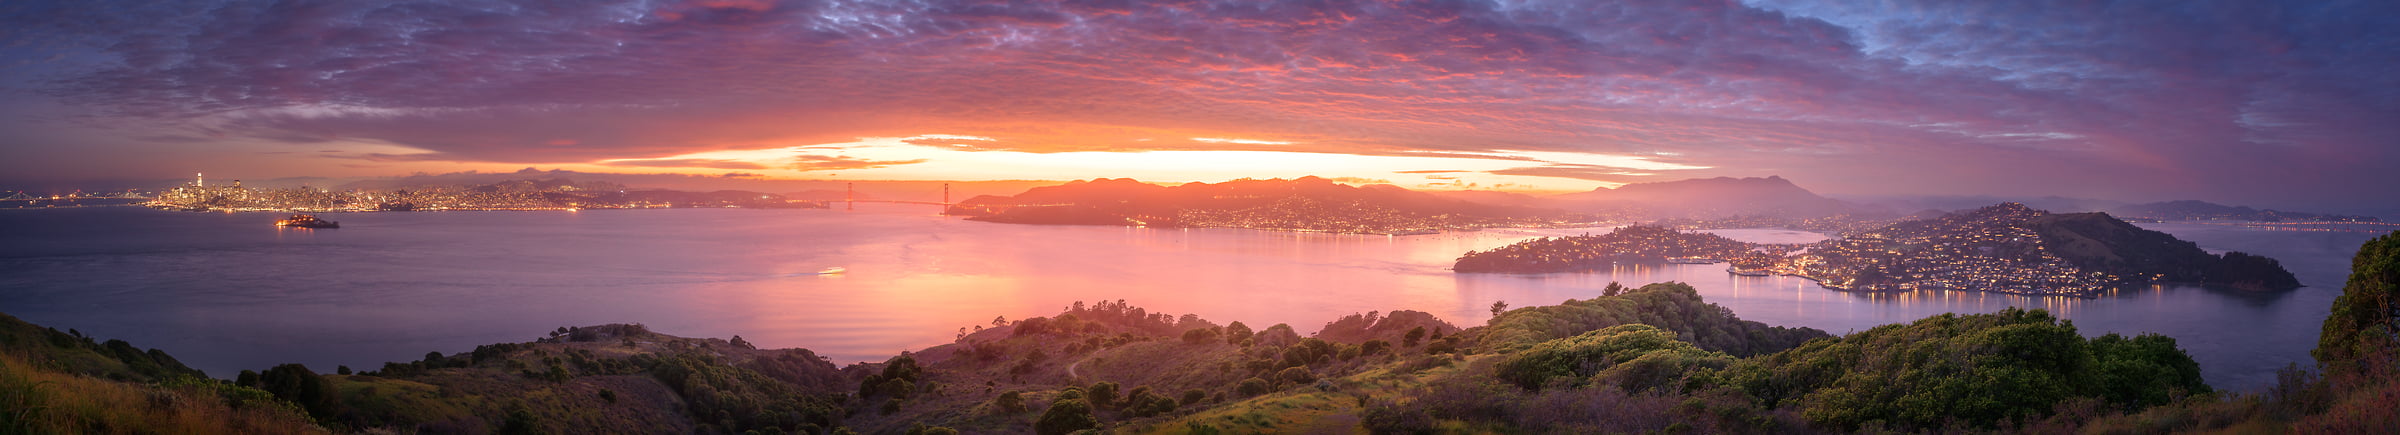 248 megapixels! A very high resolution, large-format, panorama photo print of the San Francisco Bay, San Francisco skyline, Golden Gate Bridge, and Marin Headlands at sunset; landscape photograph created by Jeff Lewis in Marin County, California